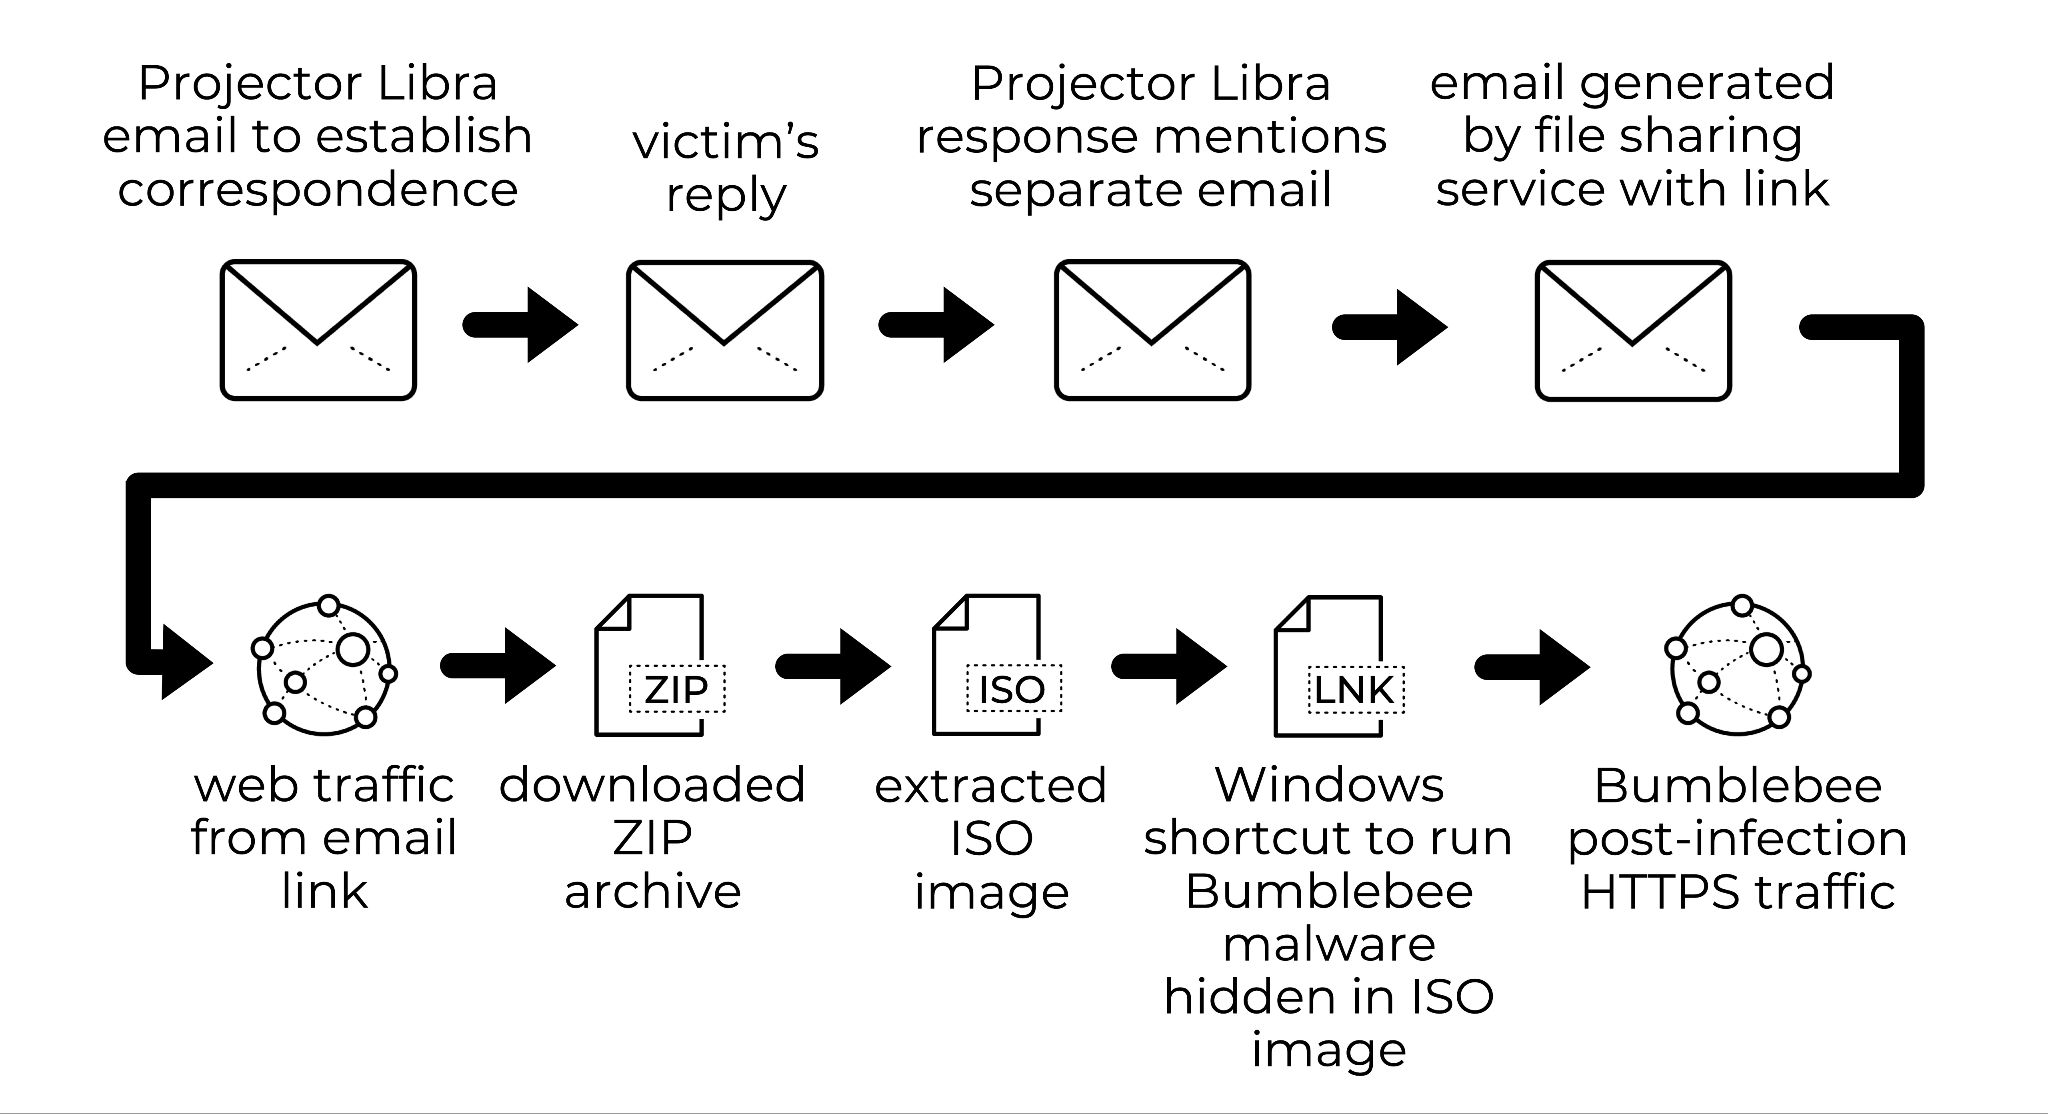 Projector Libra email to establish correspondence > victim's reply > Projector Libra response mentions separate email > email generated by file sharing service with link > web traffic from email link > downloaded ZIP archive > extracted ISO image > Windows shortcut to run Bumblebee malware hidden in ISO image > Bumblebee post-infection HTTPS traffic